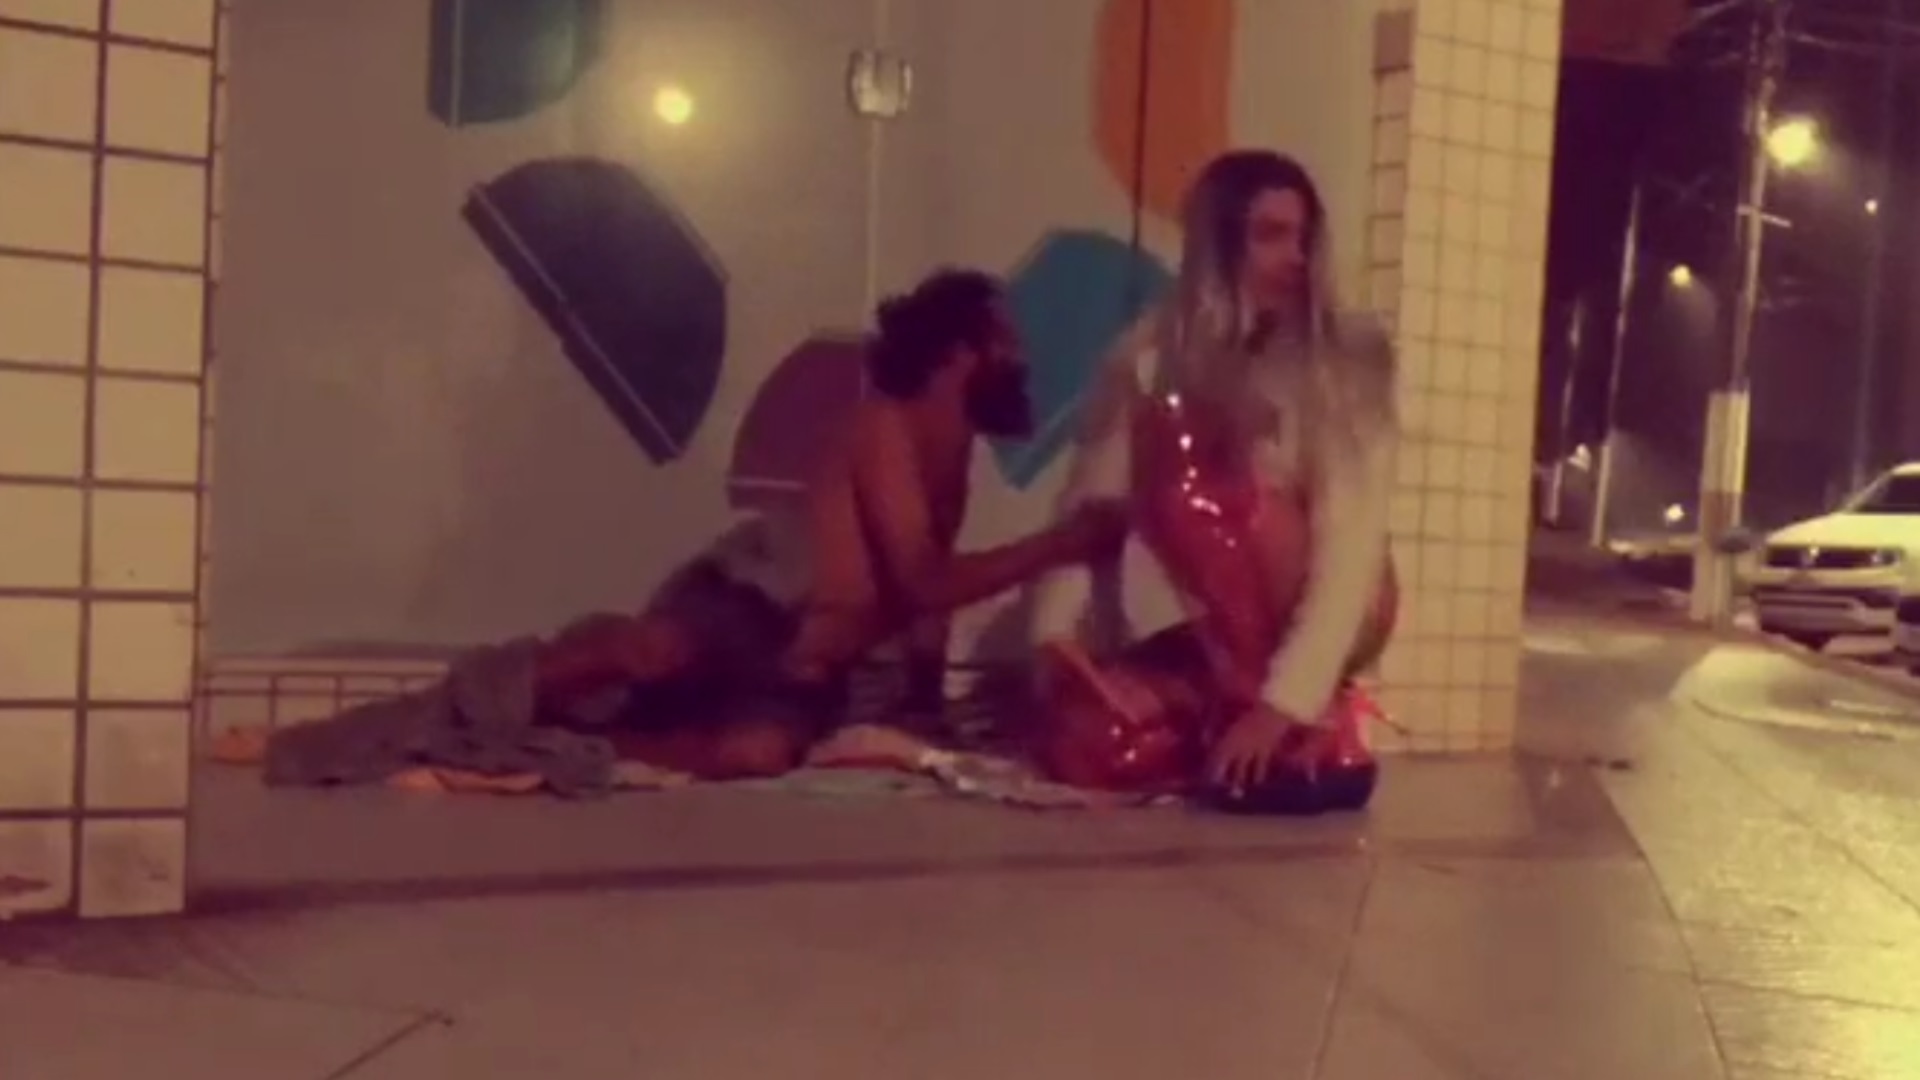 Street tranny fuck with homeless dudes for free - ThisVid.com